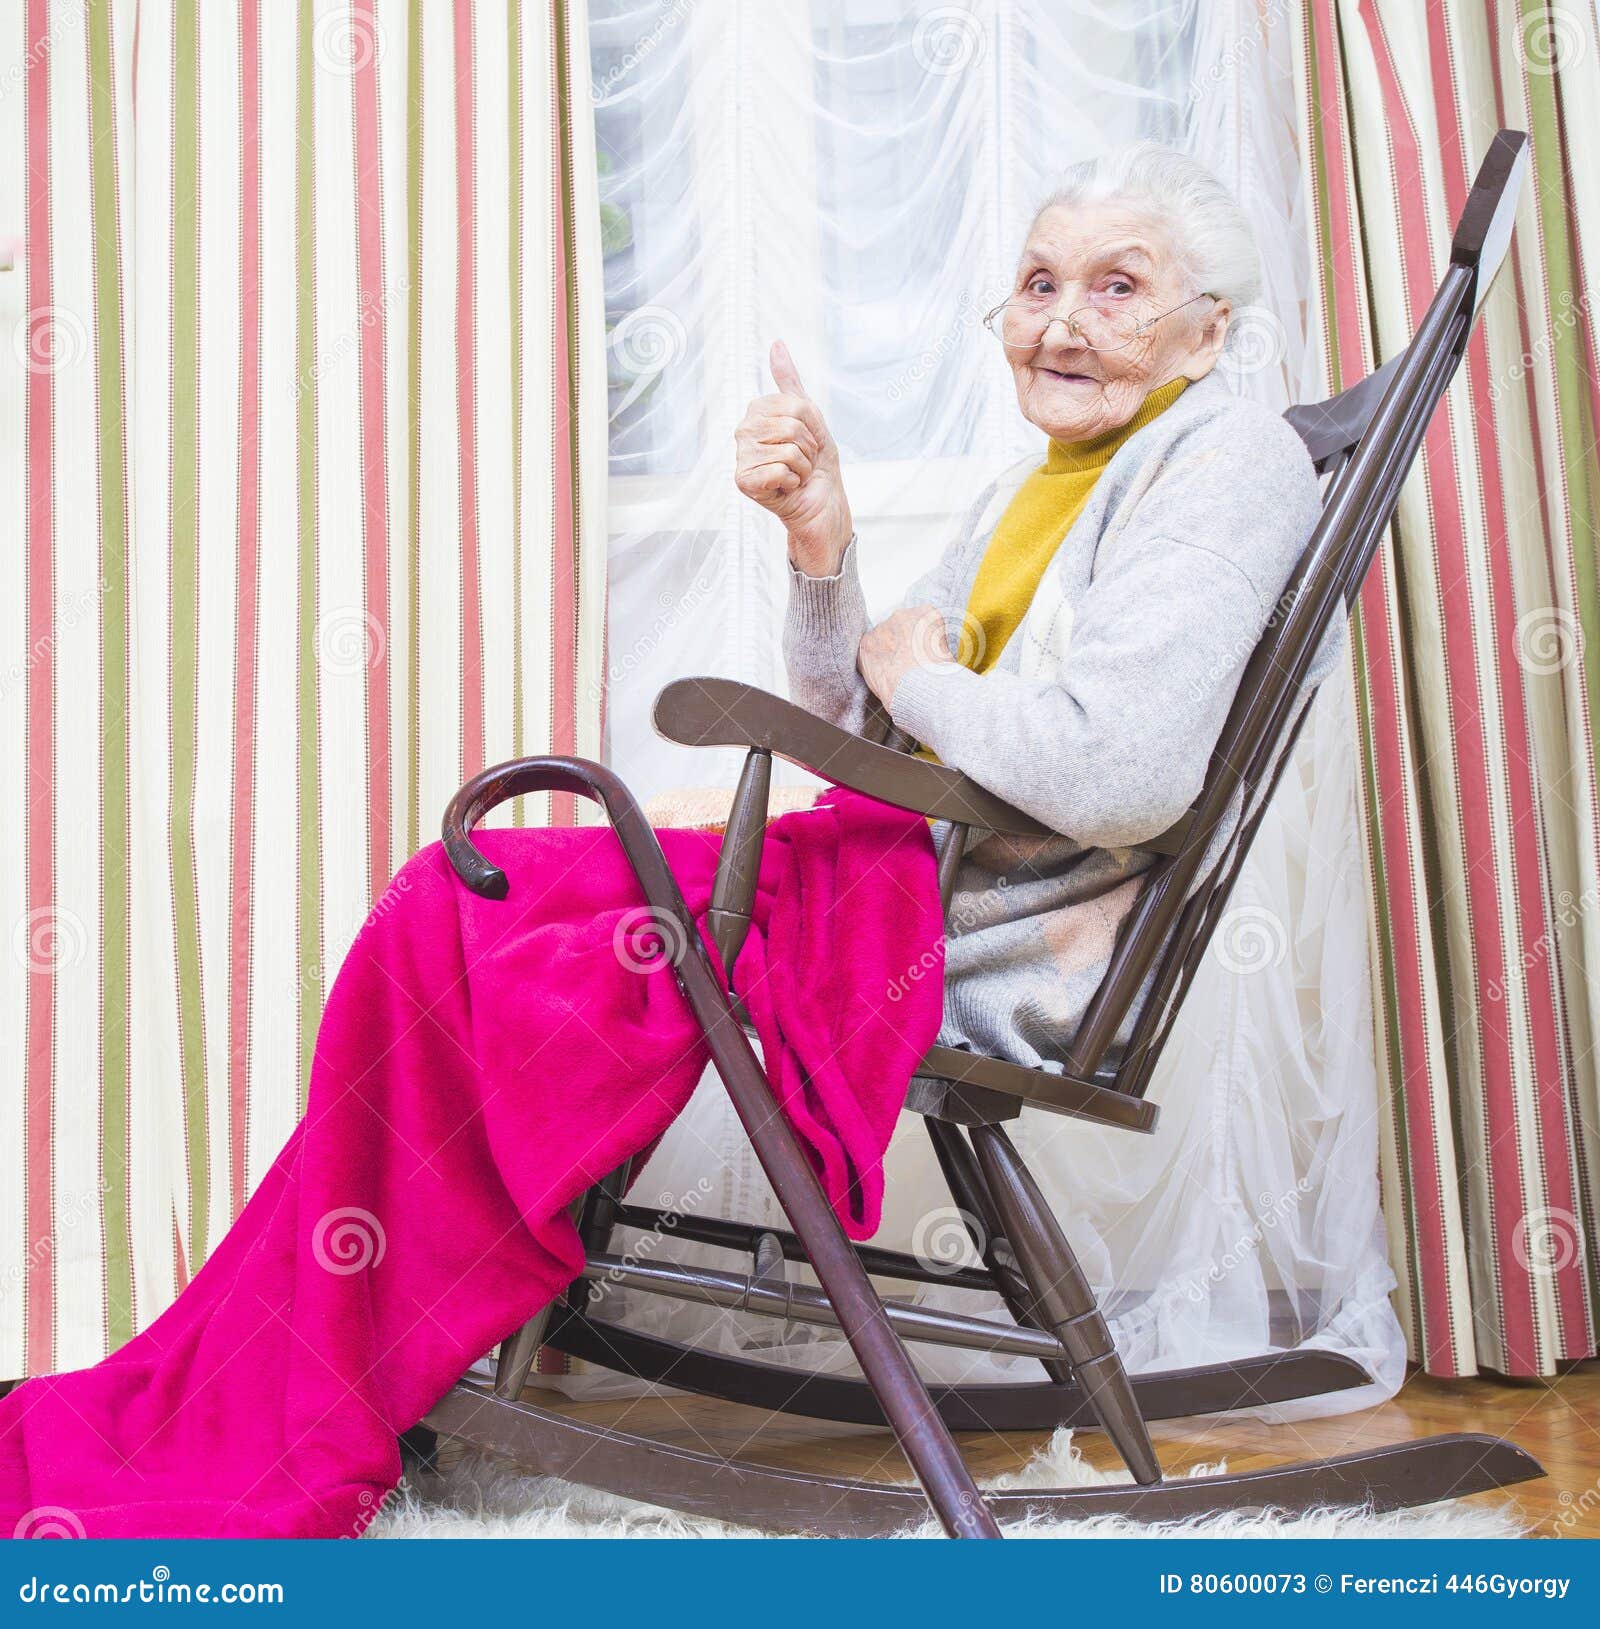 old-lady-thumbs-up-happy-elderly-chair-giving-80600073.jpg